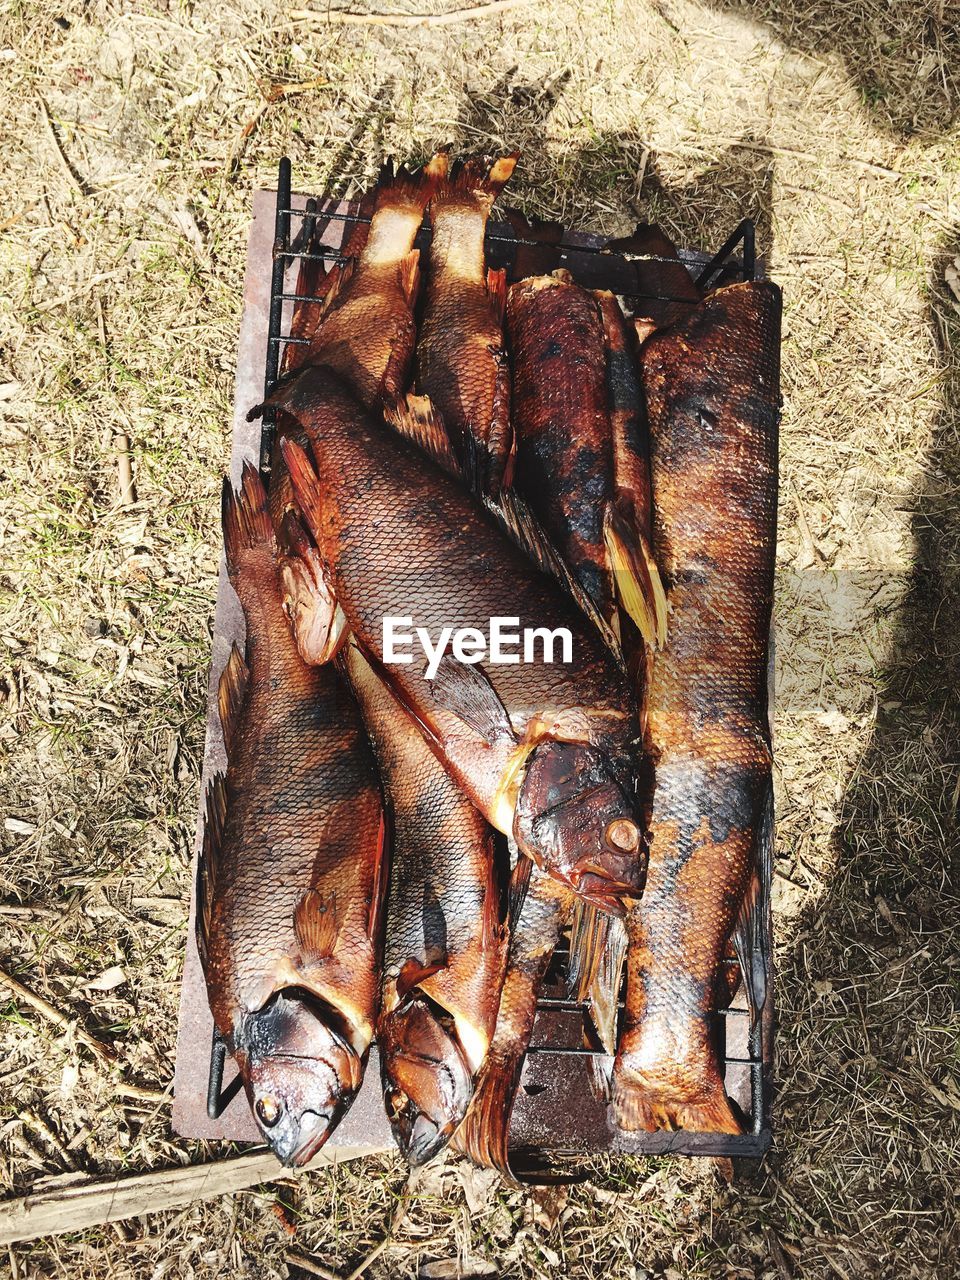 HIGH ANGLE VIEW OF DEAD FISH ON BARBECUE GRILL